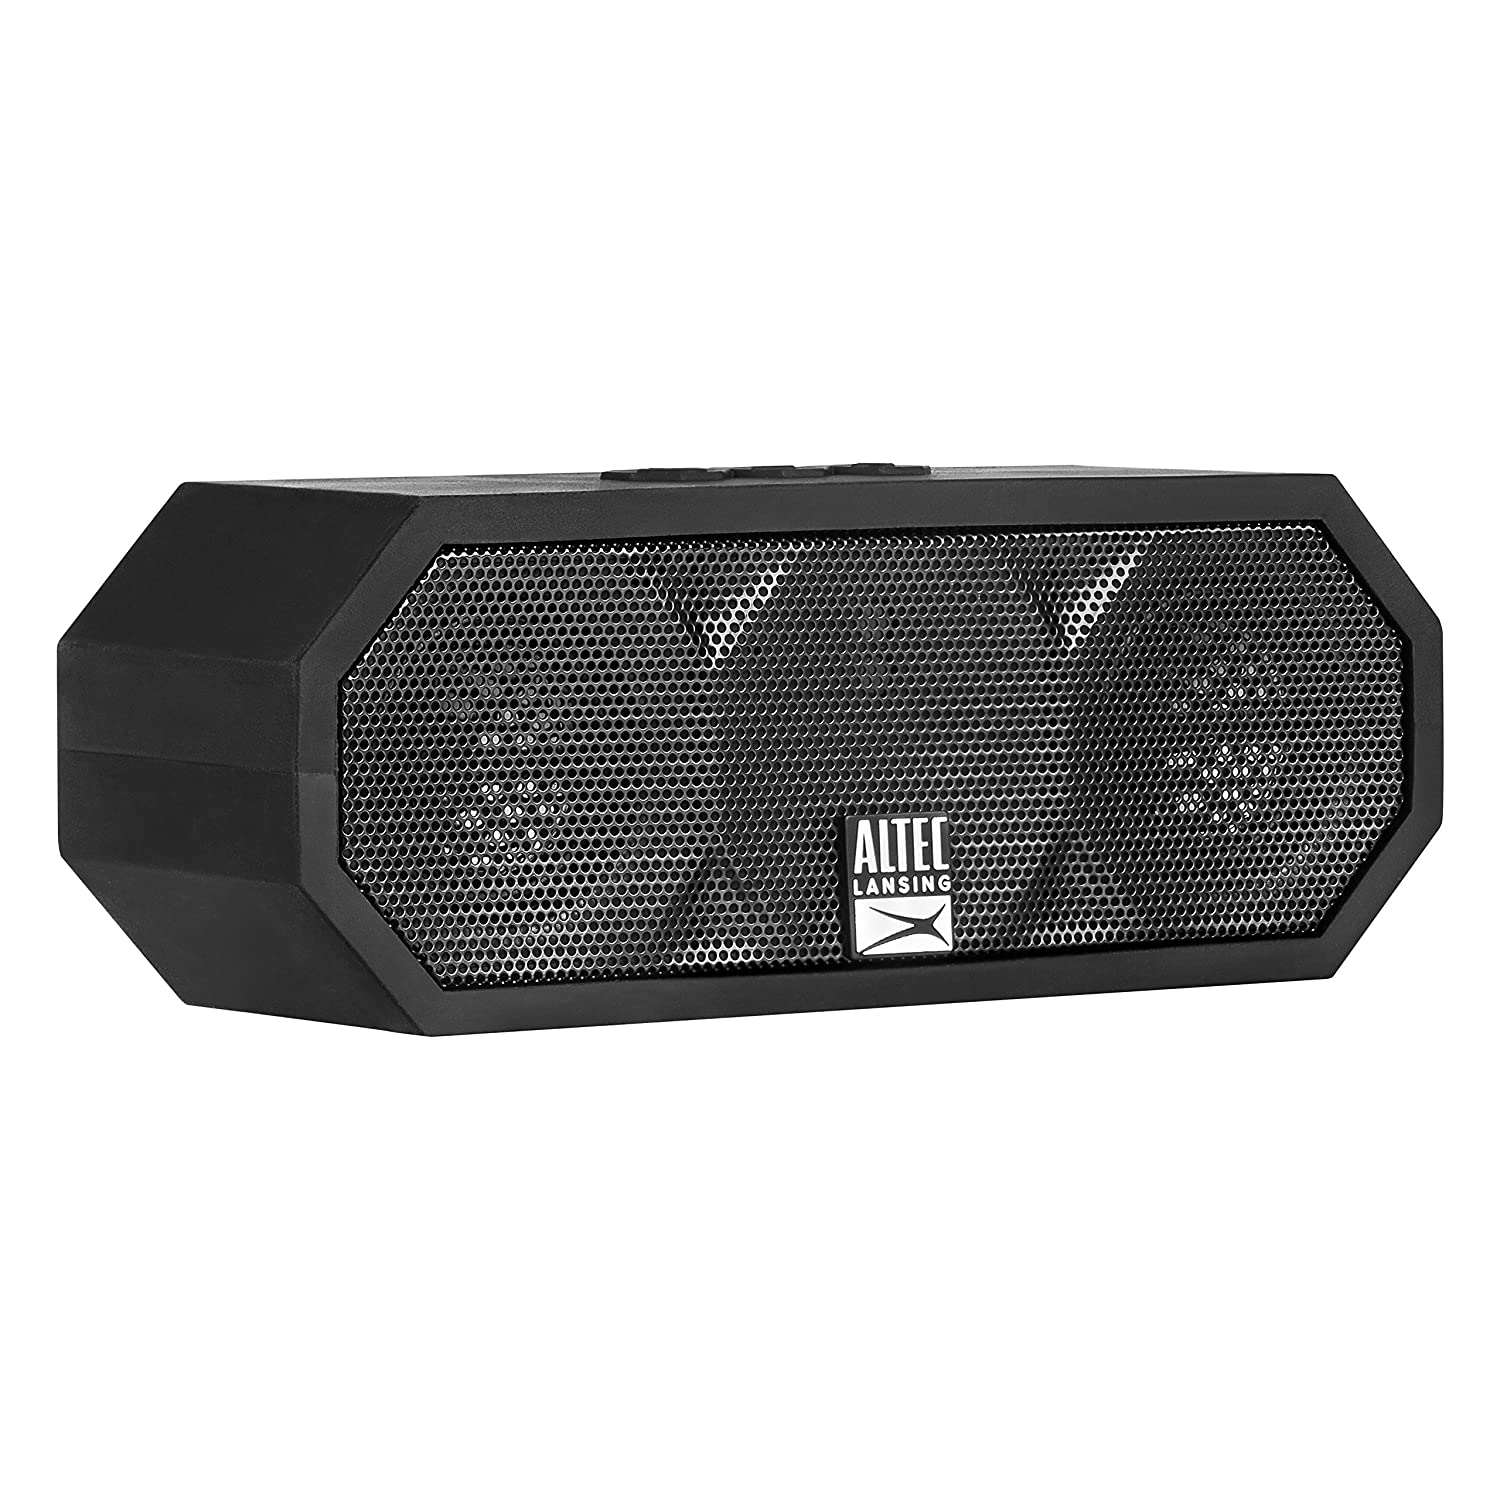 Speaker Connection: Connecting Altec Lansing Bluetooth Speaker To Your Phone